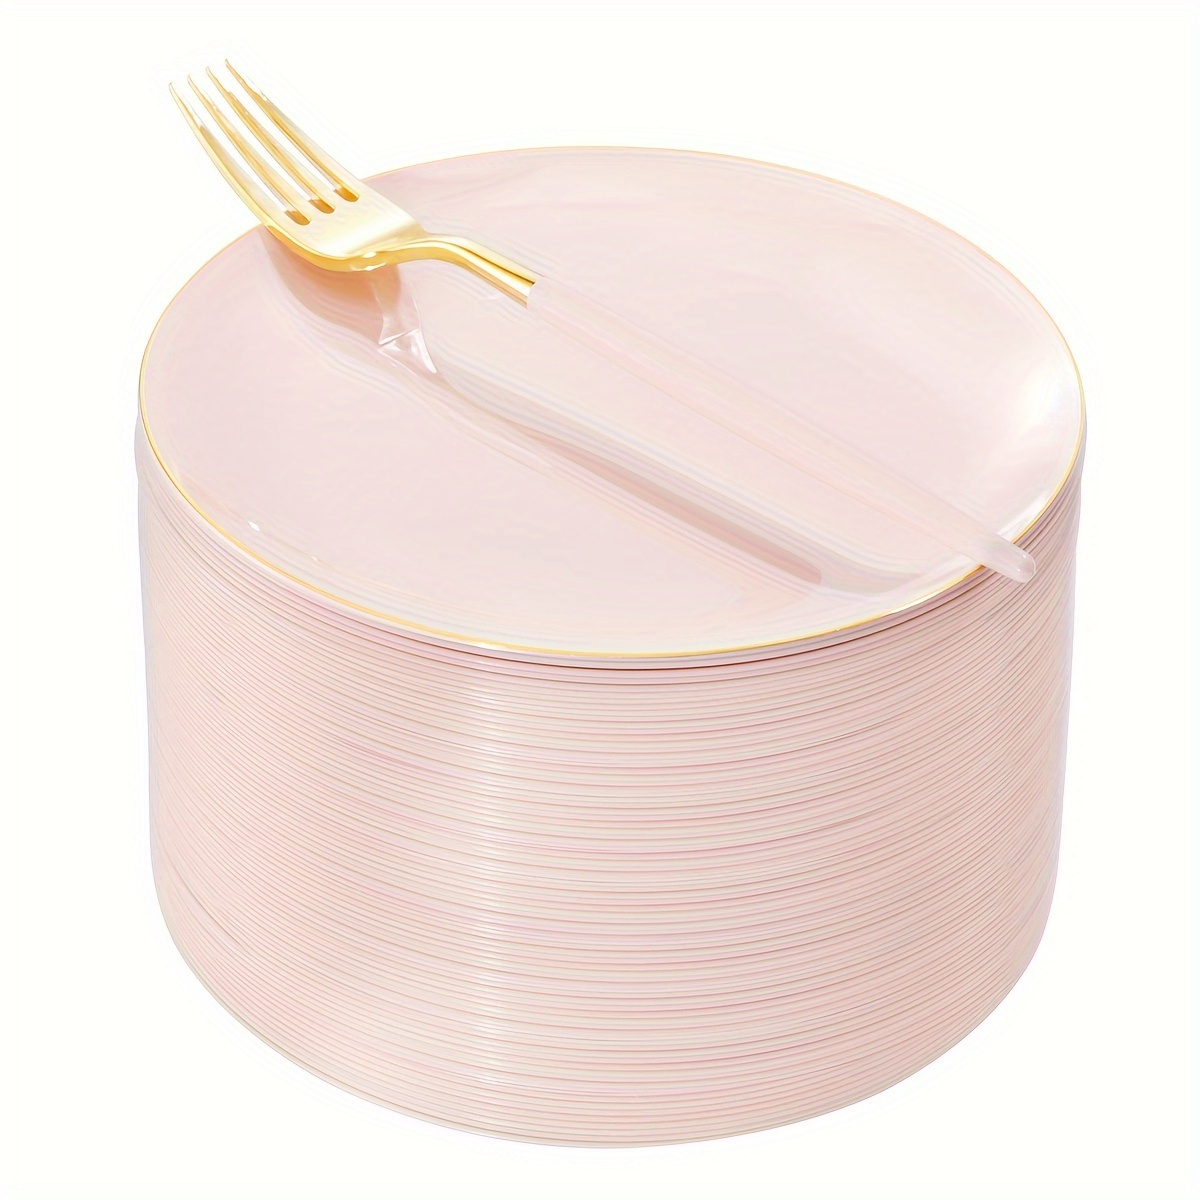 

72pcs Plastic Dessert Plates With 72pcs Disposable Pink Forks, Premium Pink Appetizer Plates, Fancy Pink Salad Plates With Gold Rims Perfect For Wedding, Party & Mother's Day